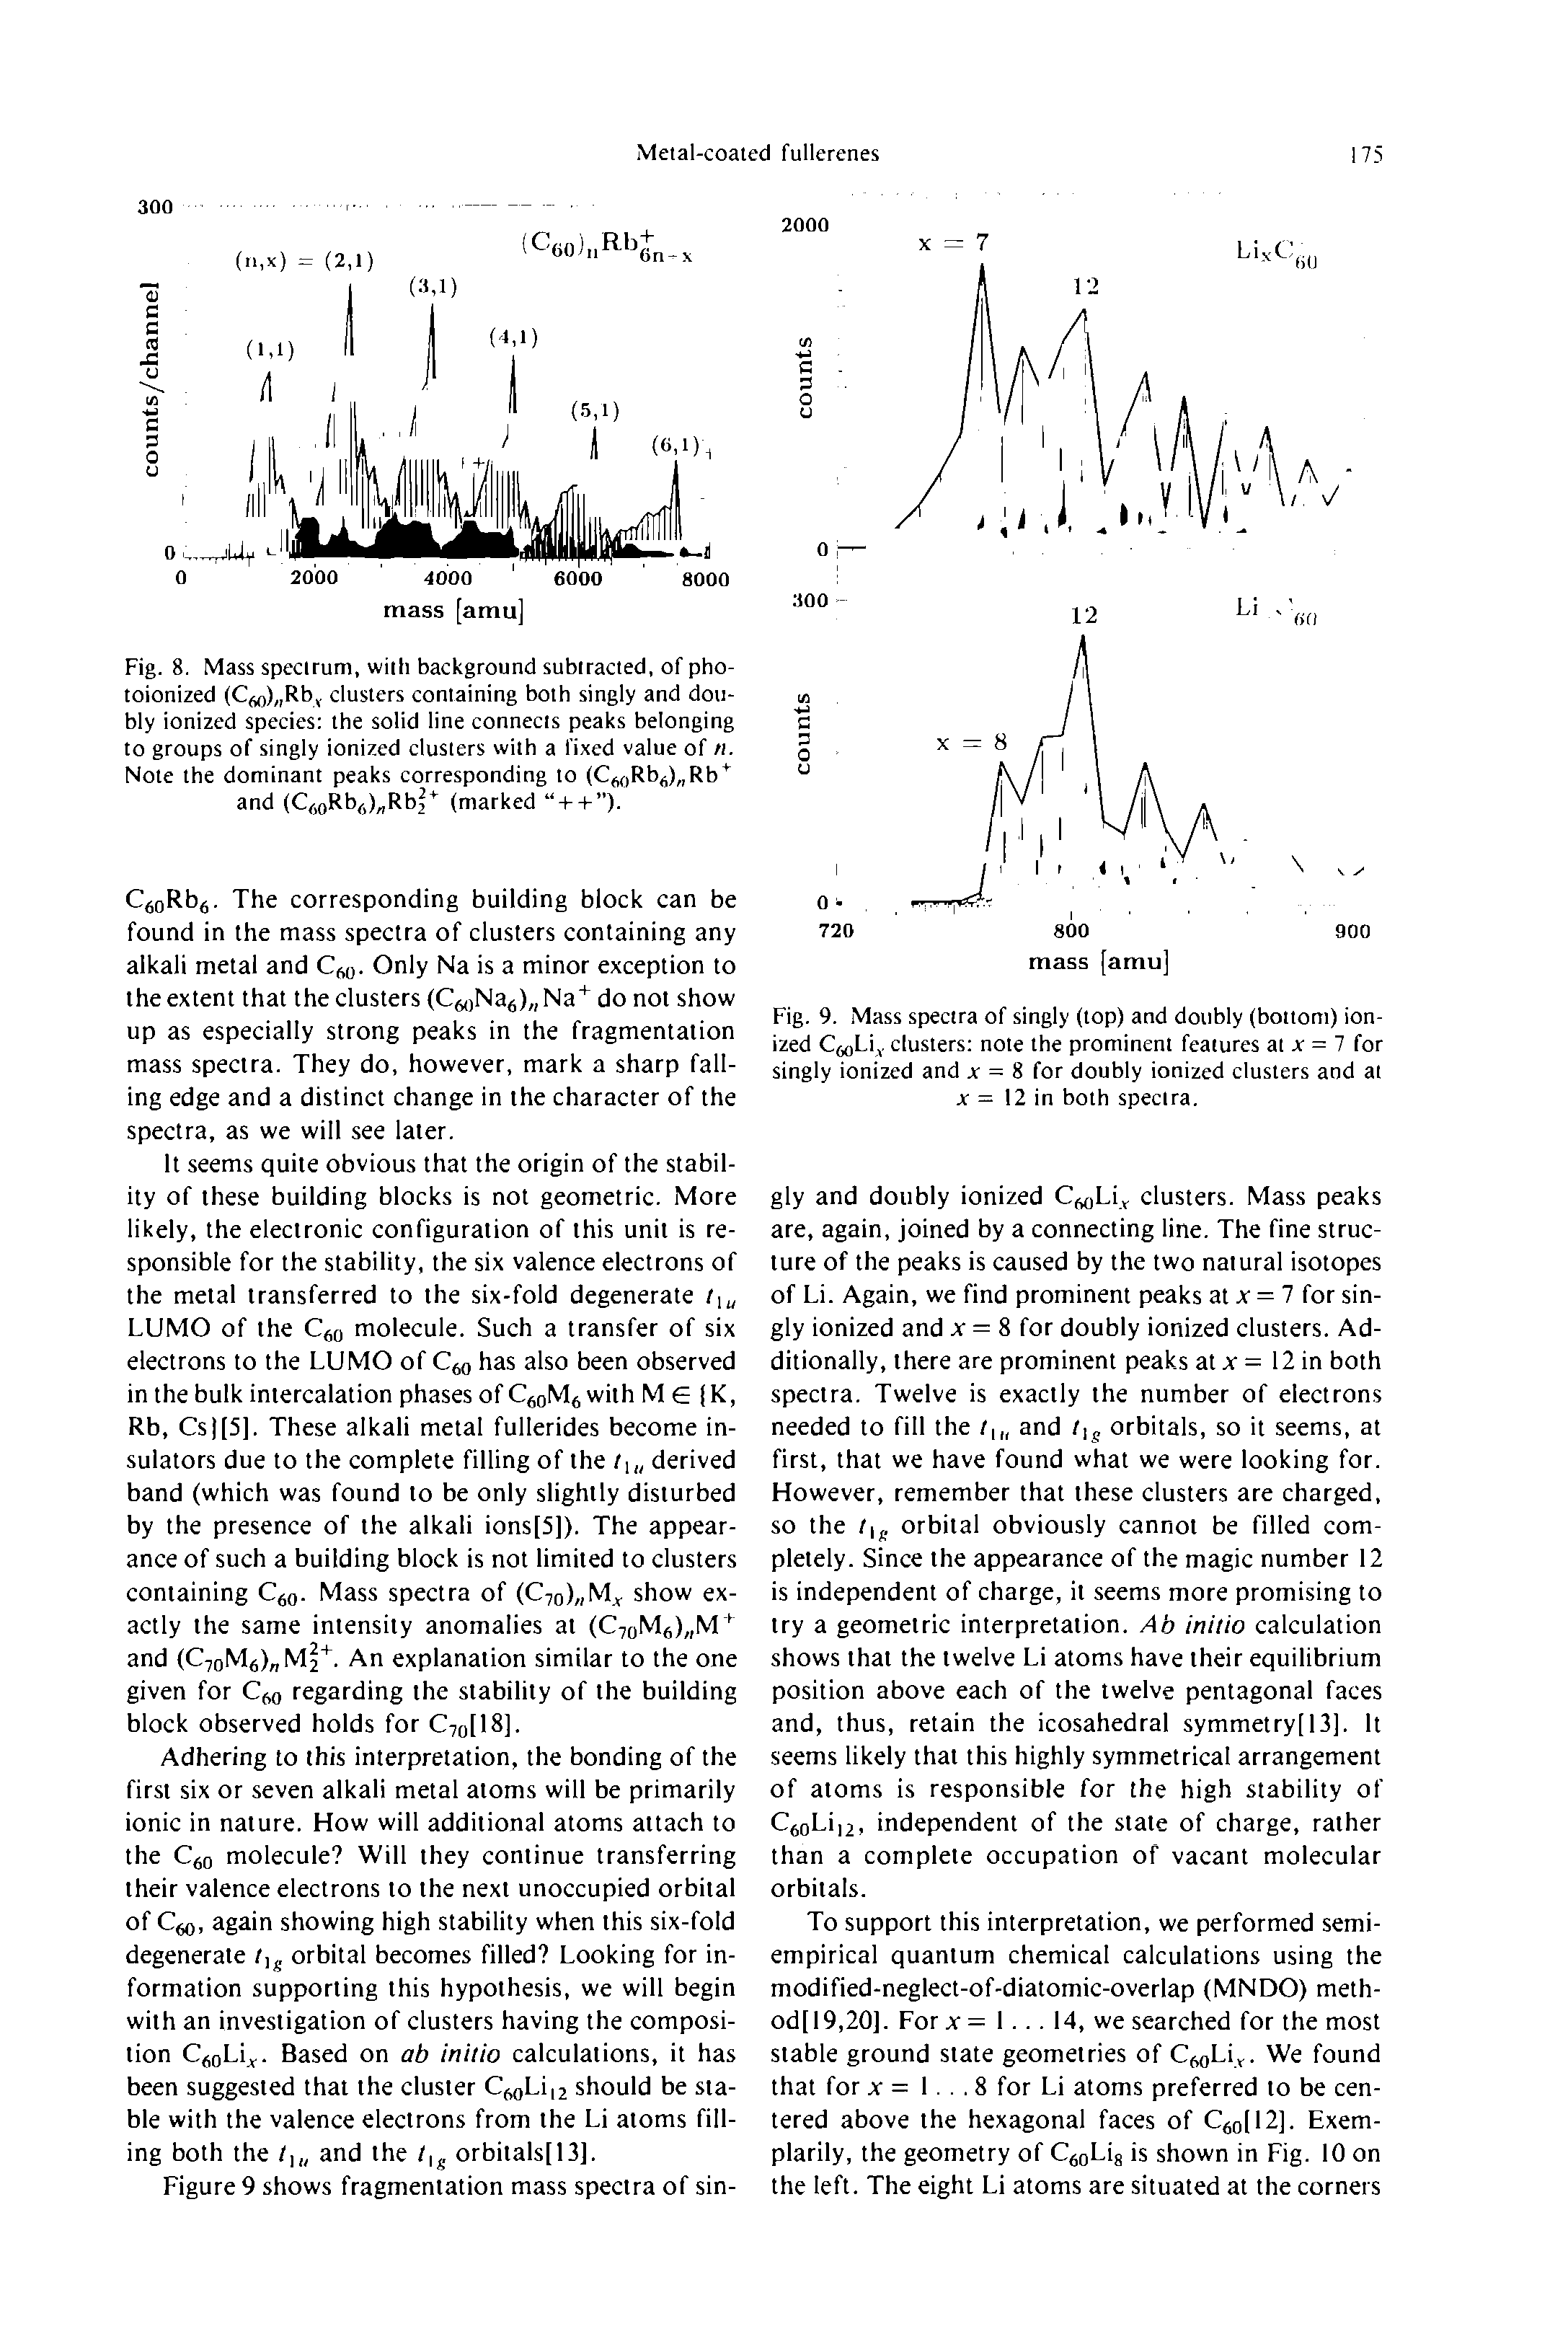 Fig. 8. Mass spectrum, with background subtracted, of pbo-toionized (Cfto) Rbv clusters containing both singly and doubly ionized species tbe solid line connects peaks belonging to groups of singly ionized clusters with a fixed value of n. Note tbe dominant peaks corresponding to (C (,Rb, ) Rb and (QoRb,.,) Rb2 (marked...